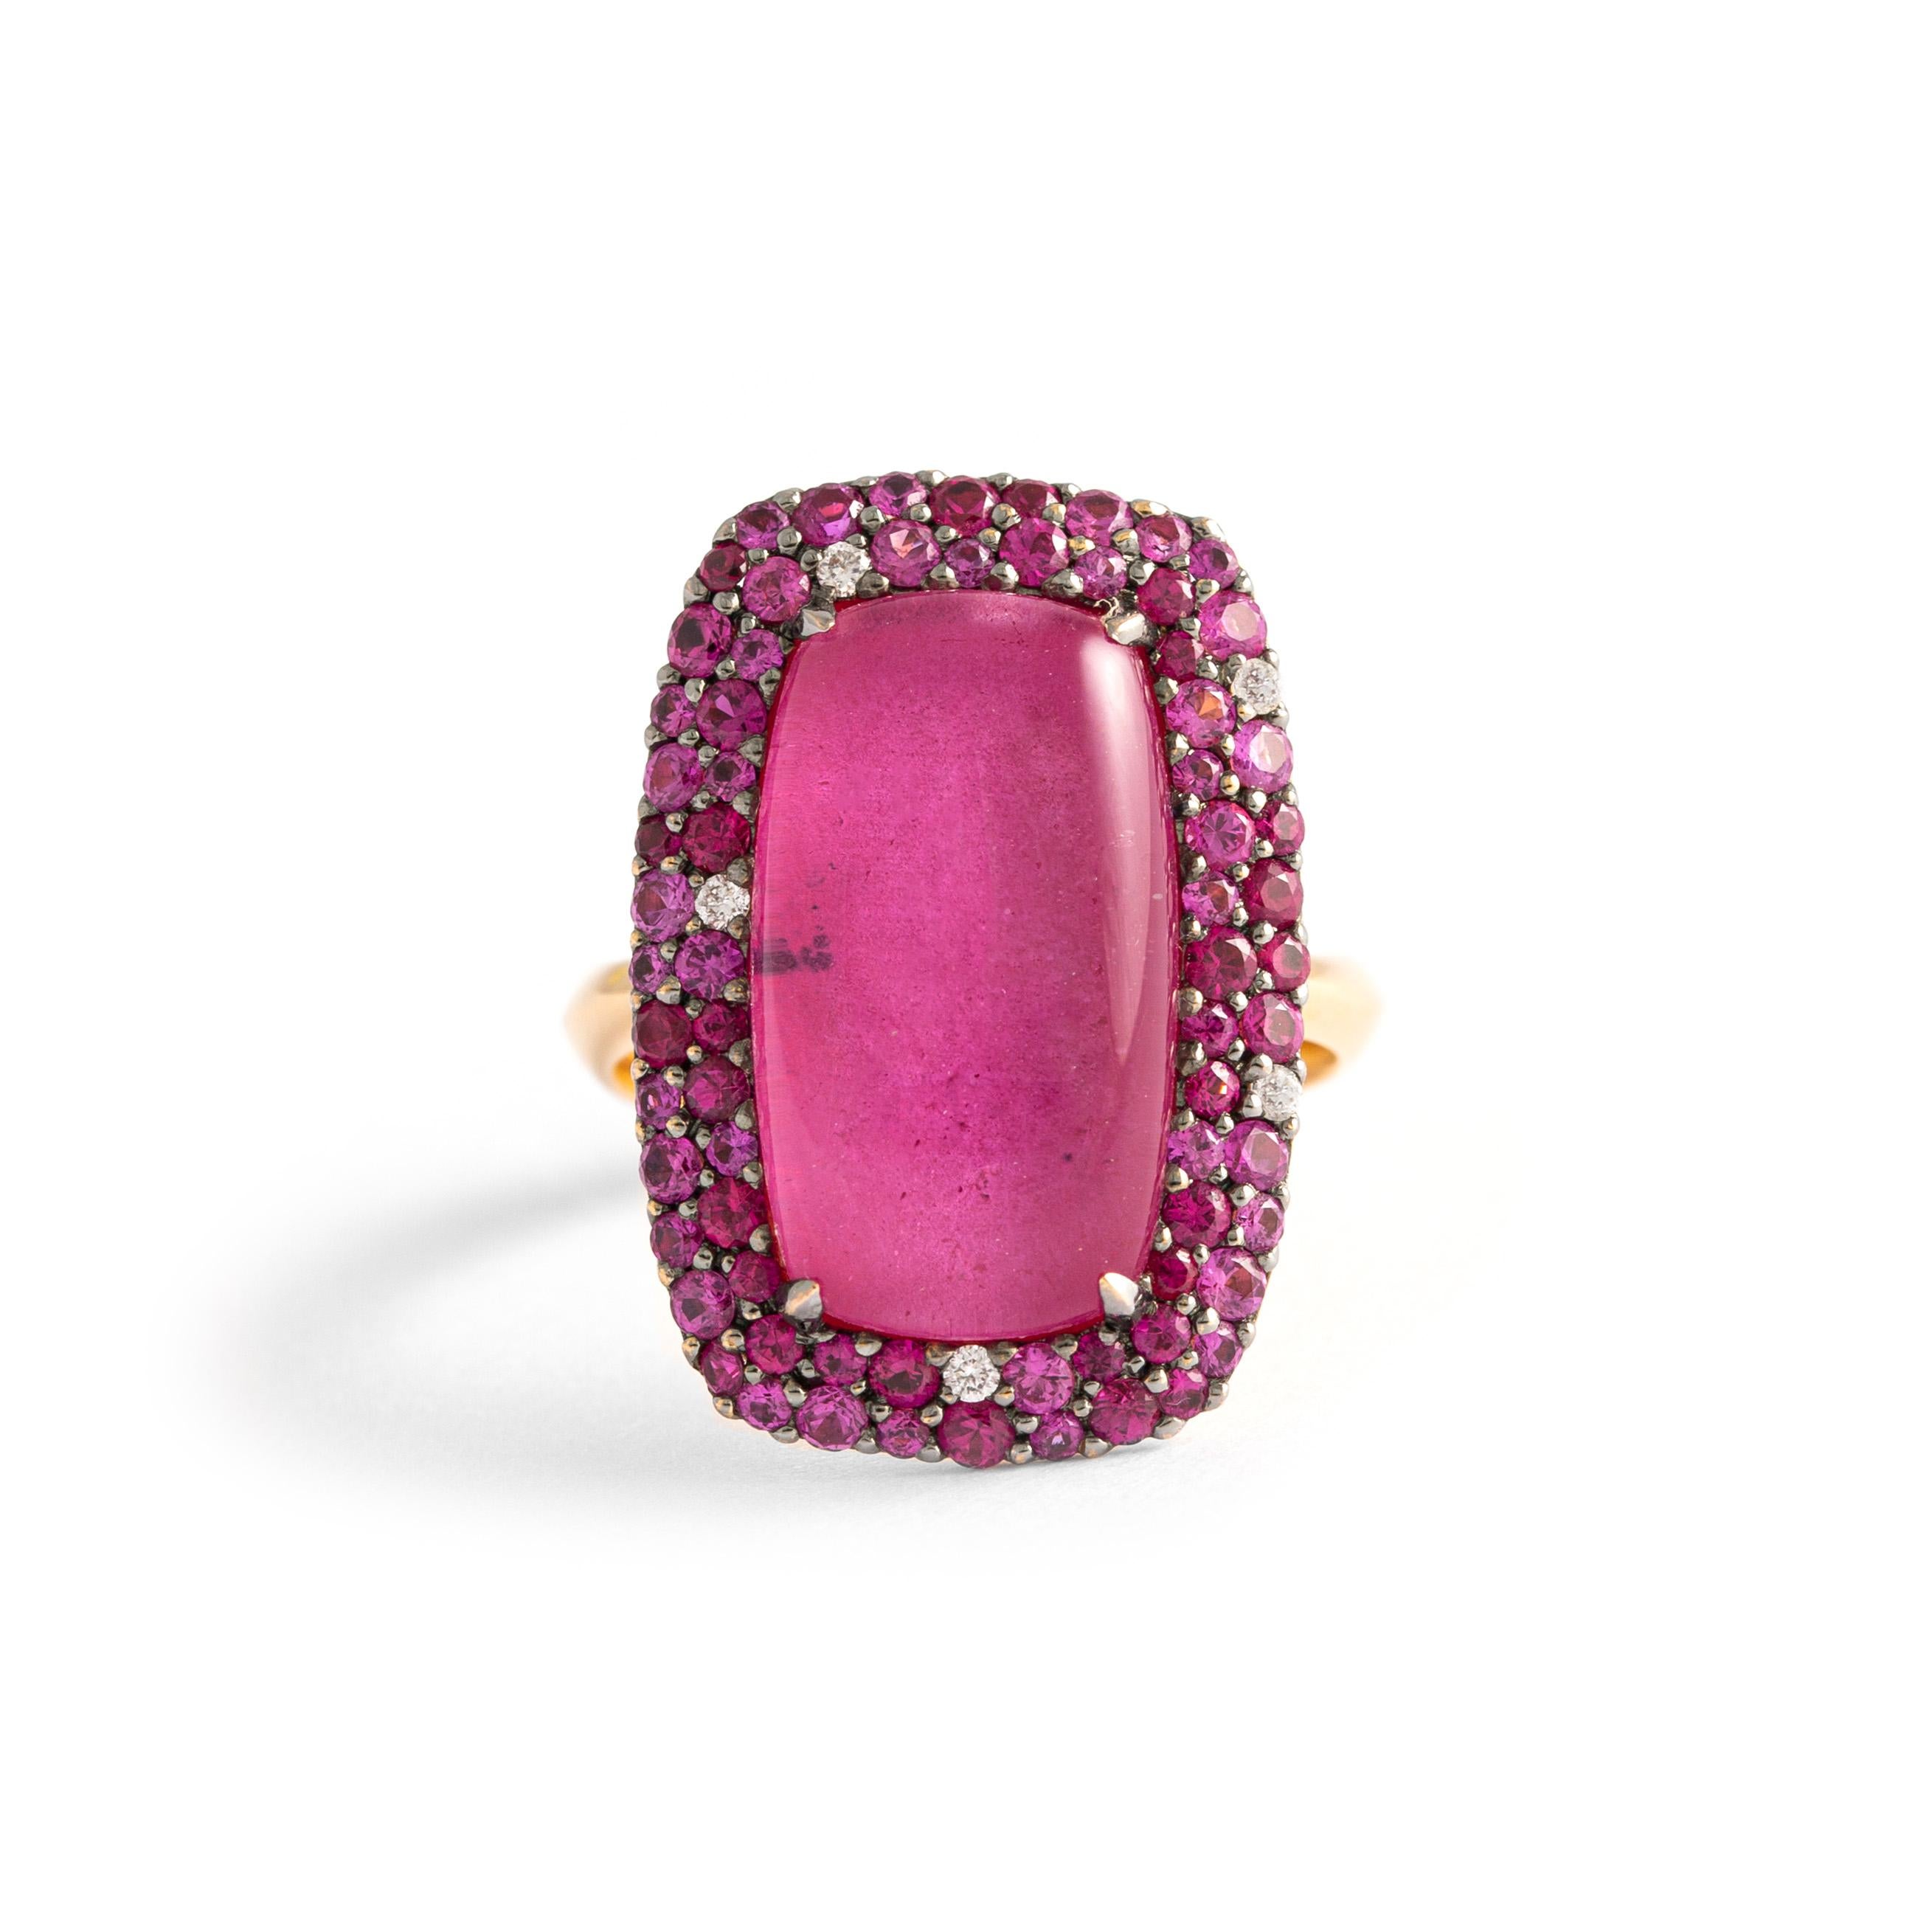 RING Au 18KT Weight 8,32 53,7 Diam. 5-Bril.Cut-0,05-
G/SI1A Duplet ruby 1-8,86 ct PINK SAPPHIRE 41-0,68 ct 
RUBY 30-0,57 ct